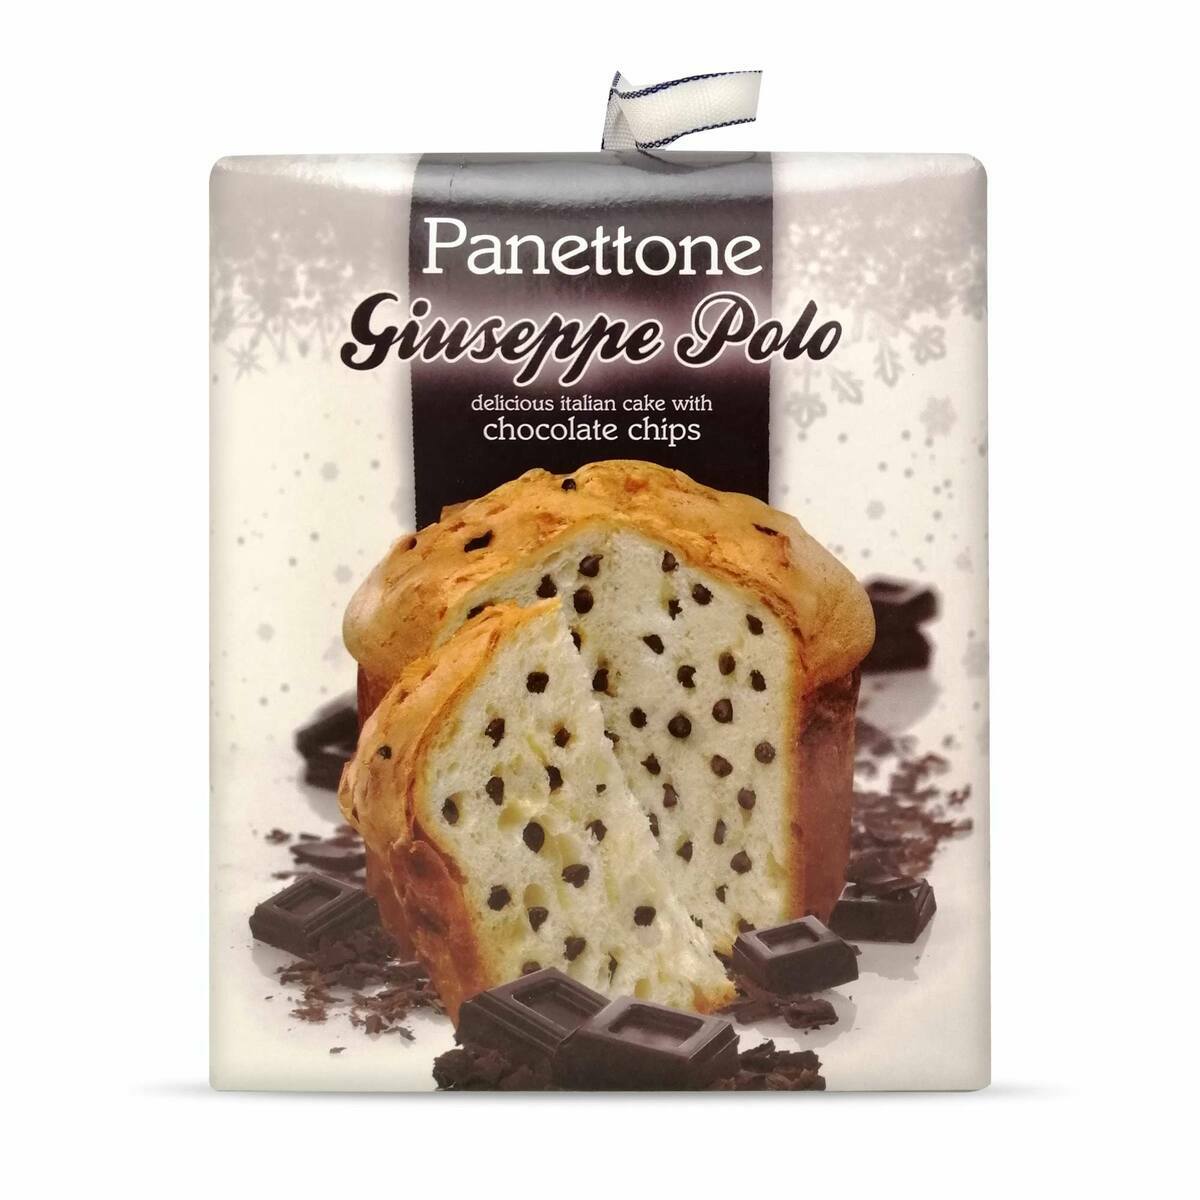 Polo Panettone Italian Cake With Chocolate Chips 500 g Online at